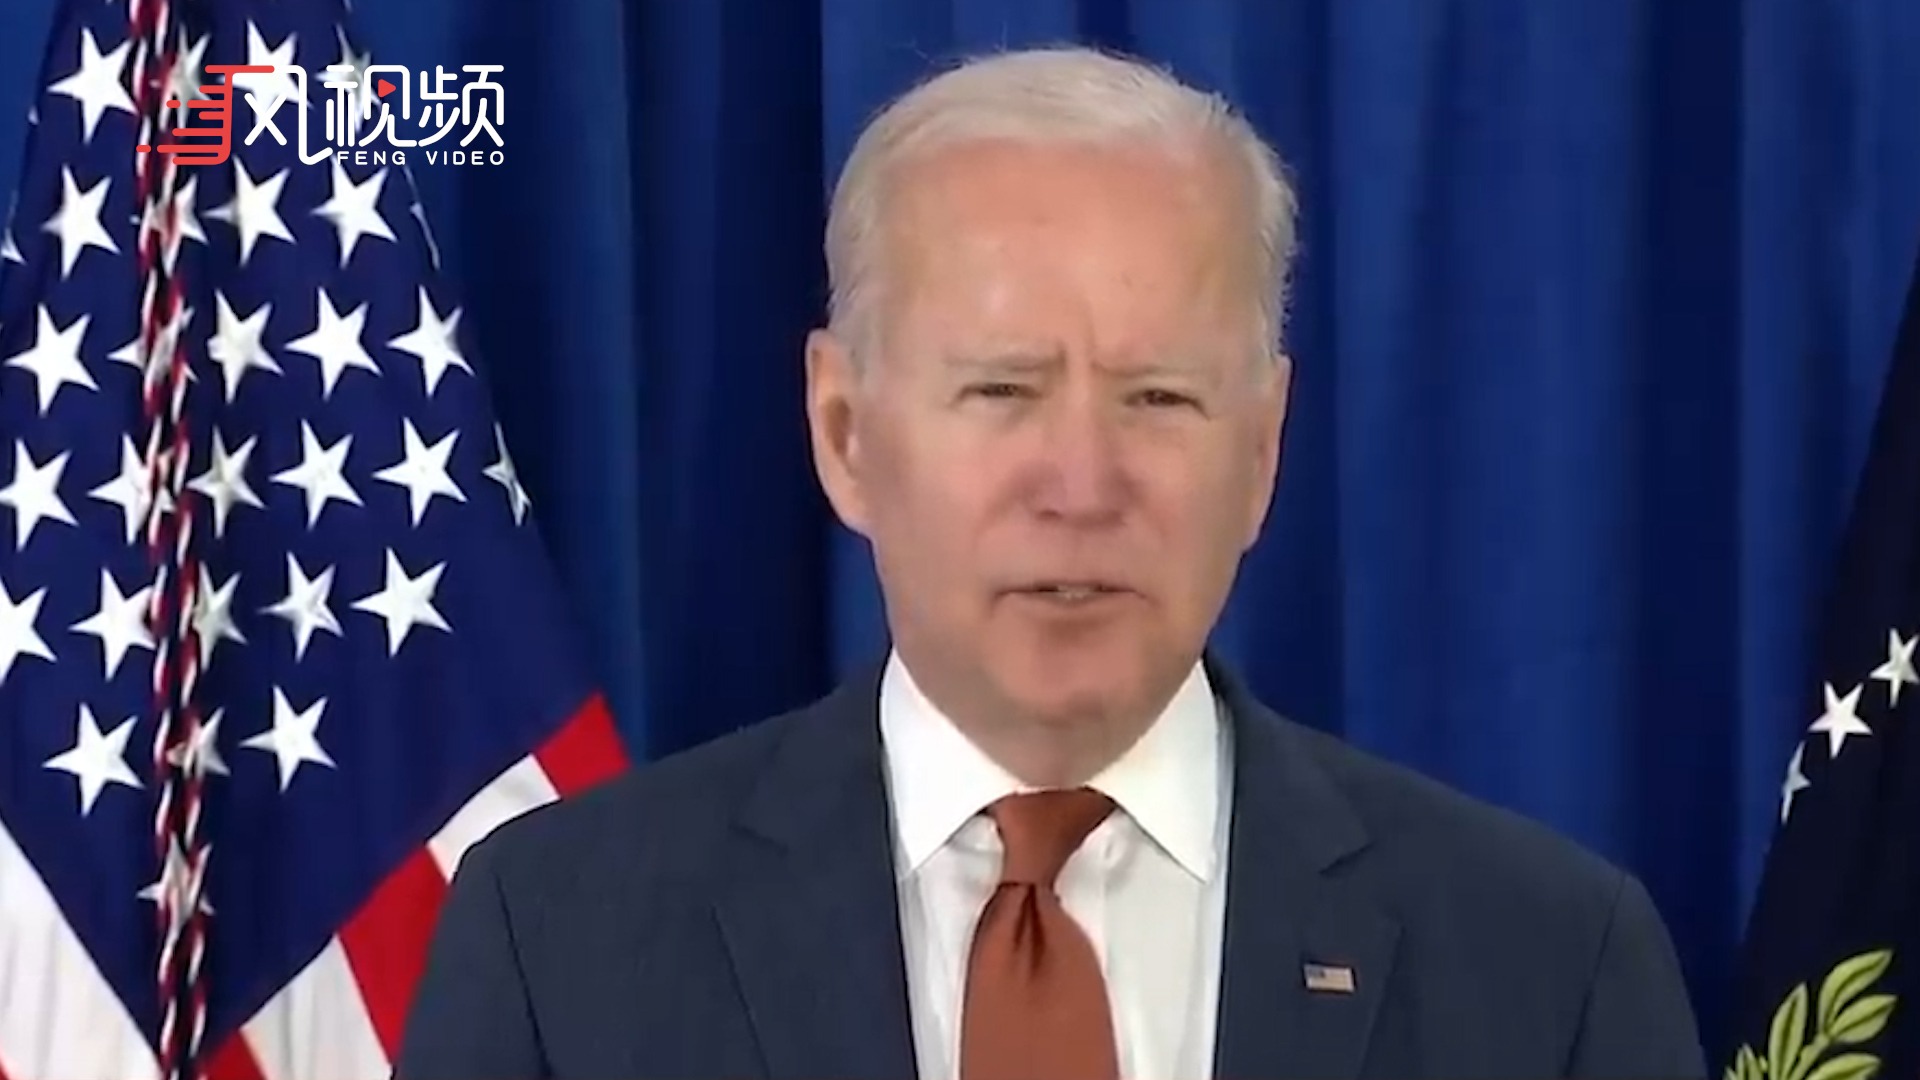 Biden Takes His 'America Is Back' Message To The World In Munich Speech ...